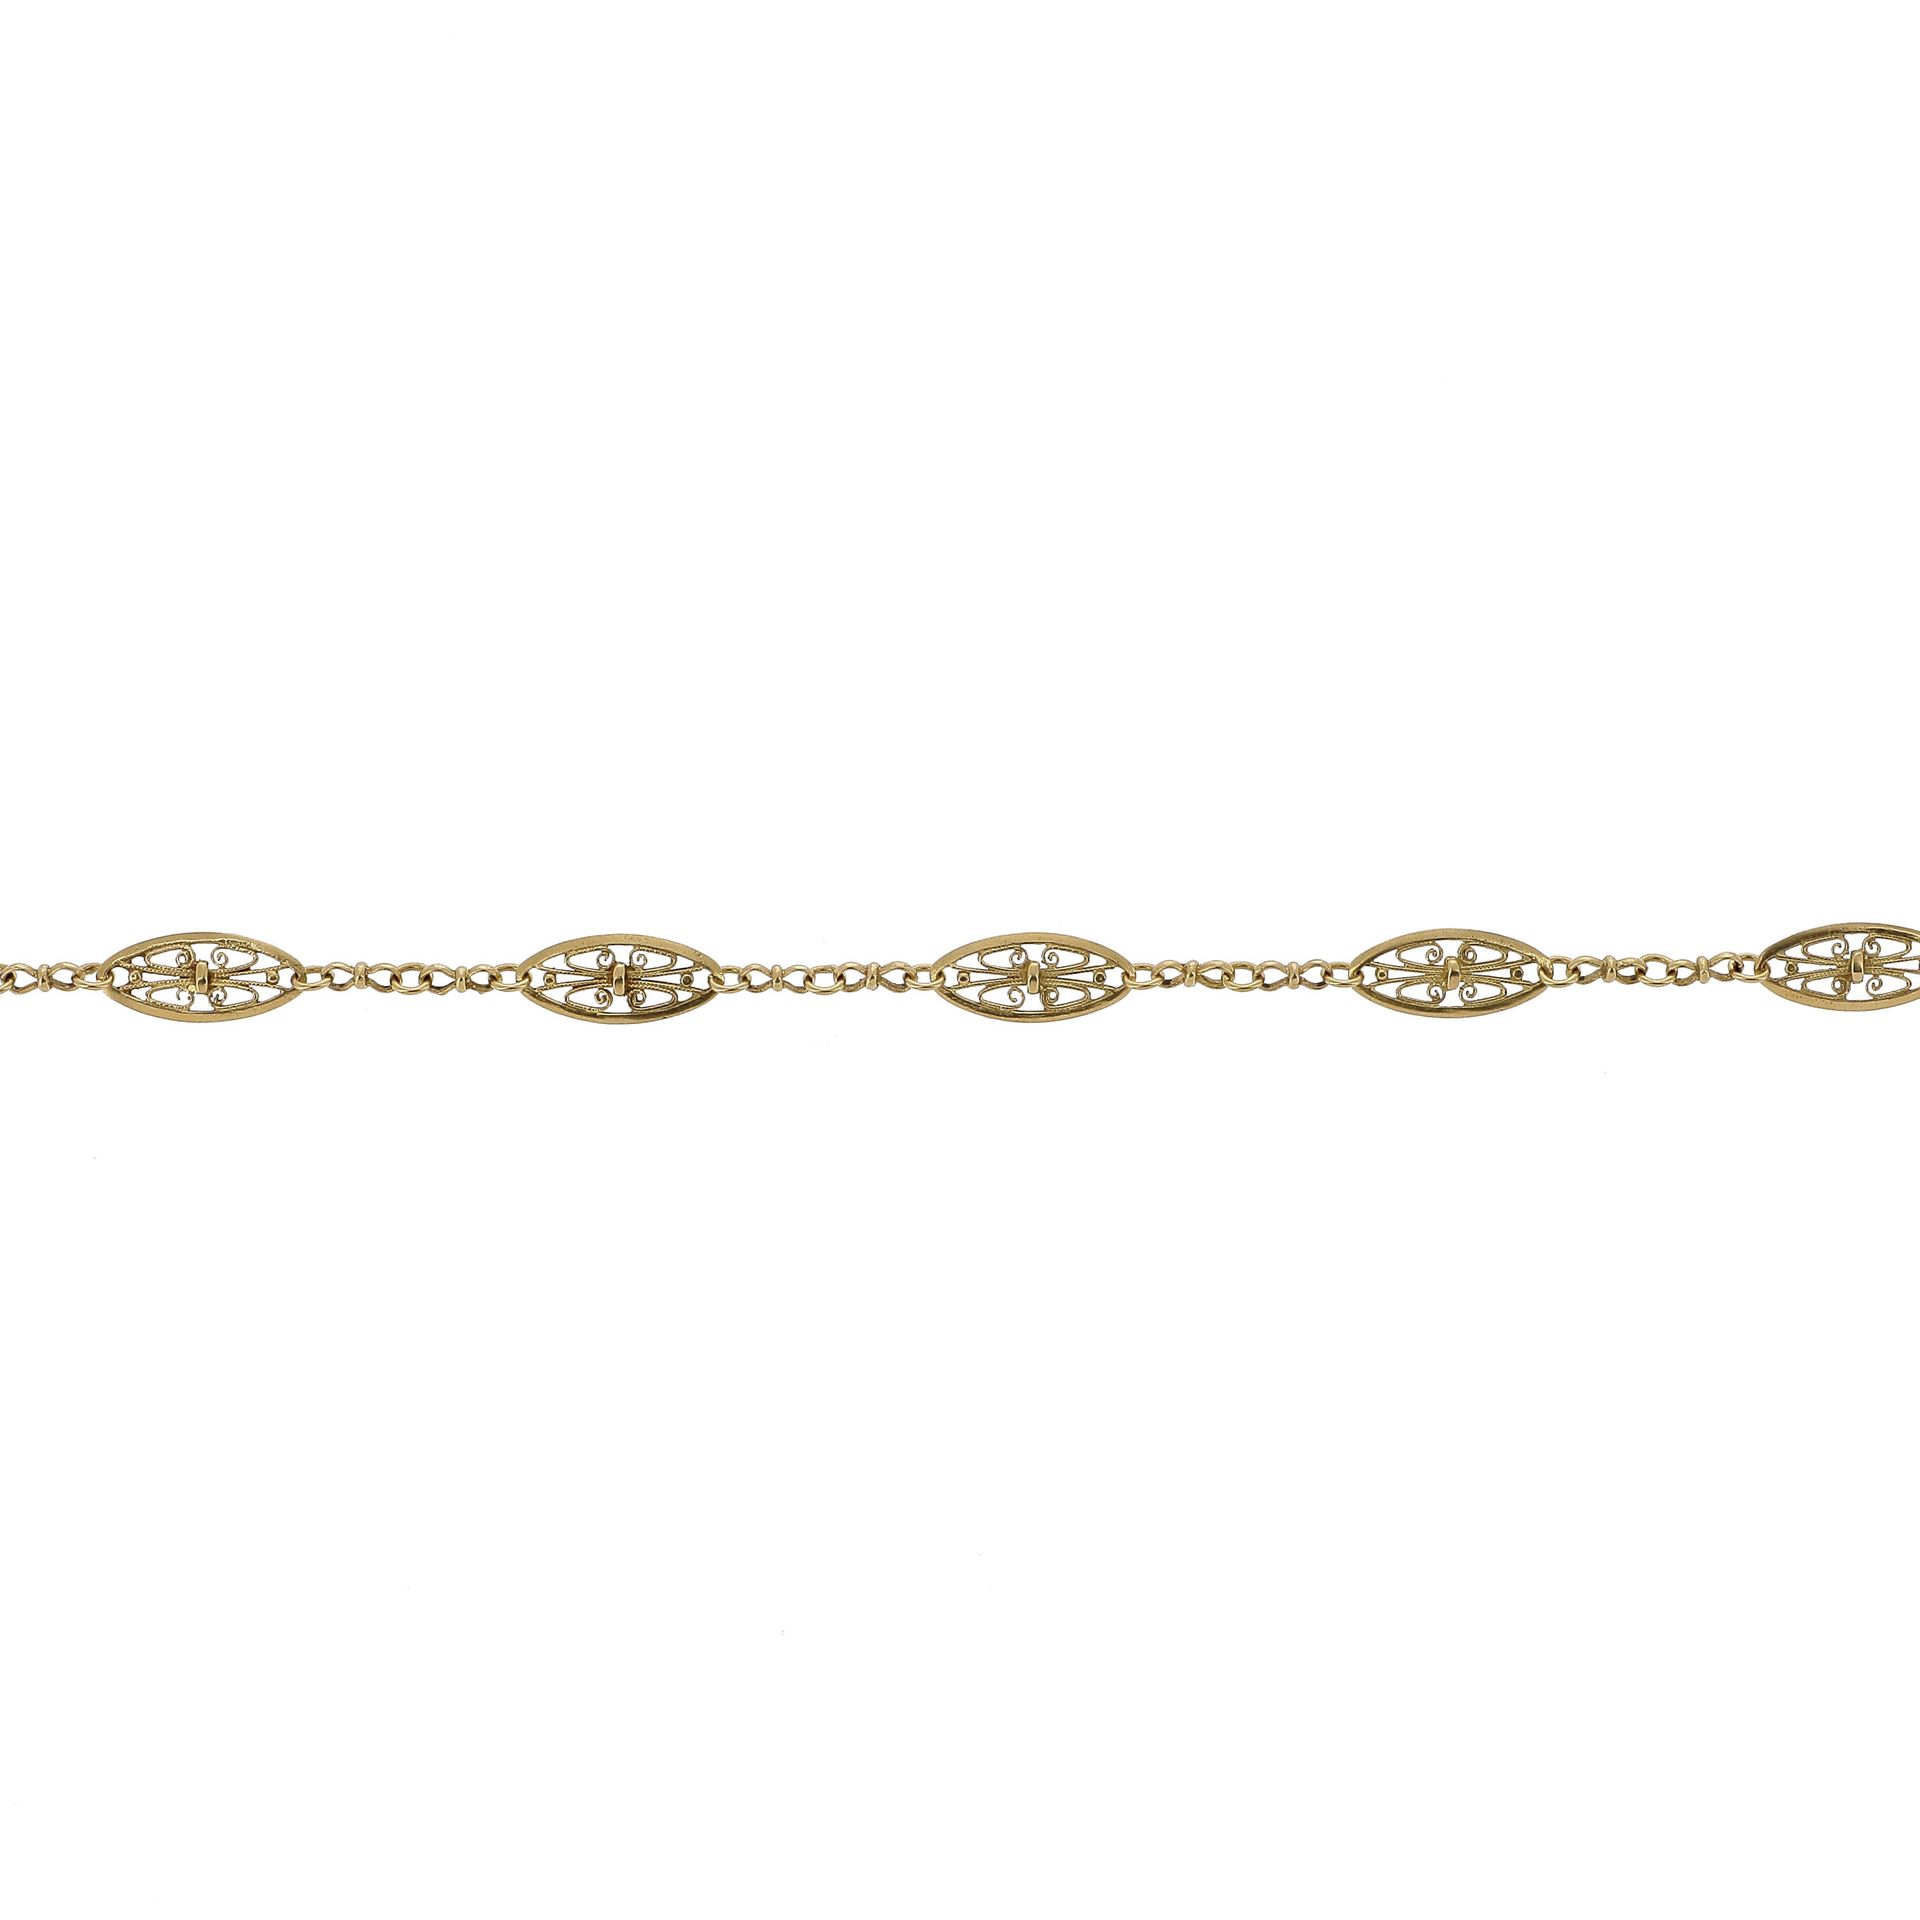 Null ANCIENT SAUTOIR

yellow gold chain, punctuated with oval filigree links. 

&hellip;